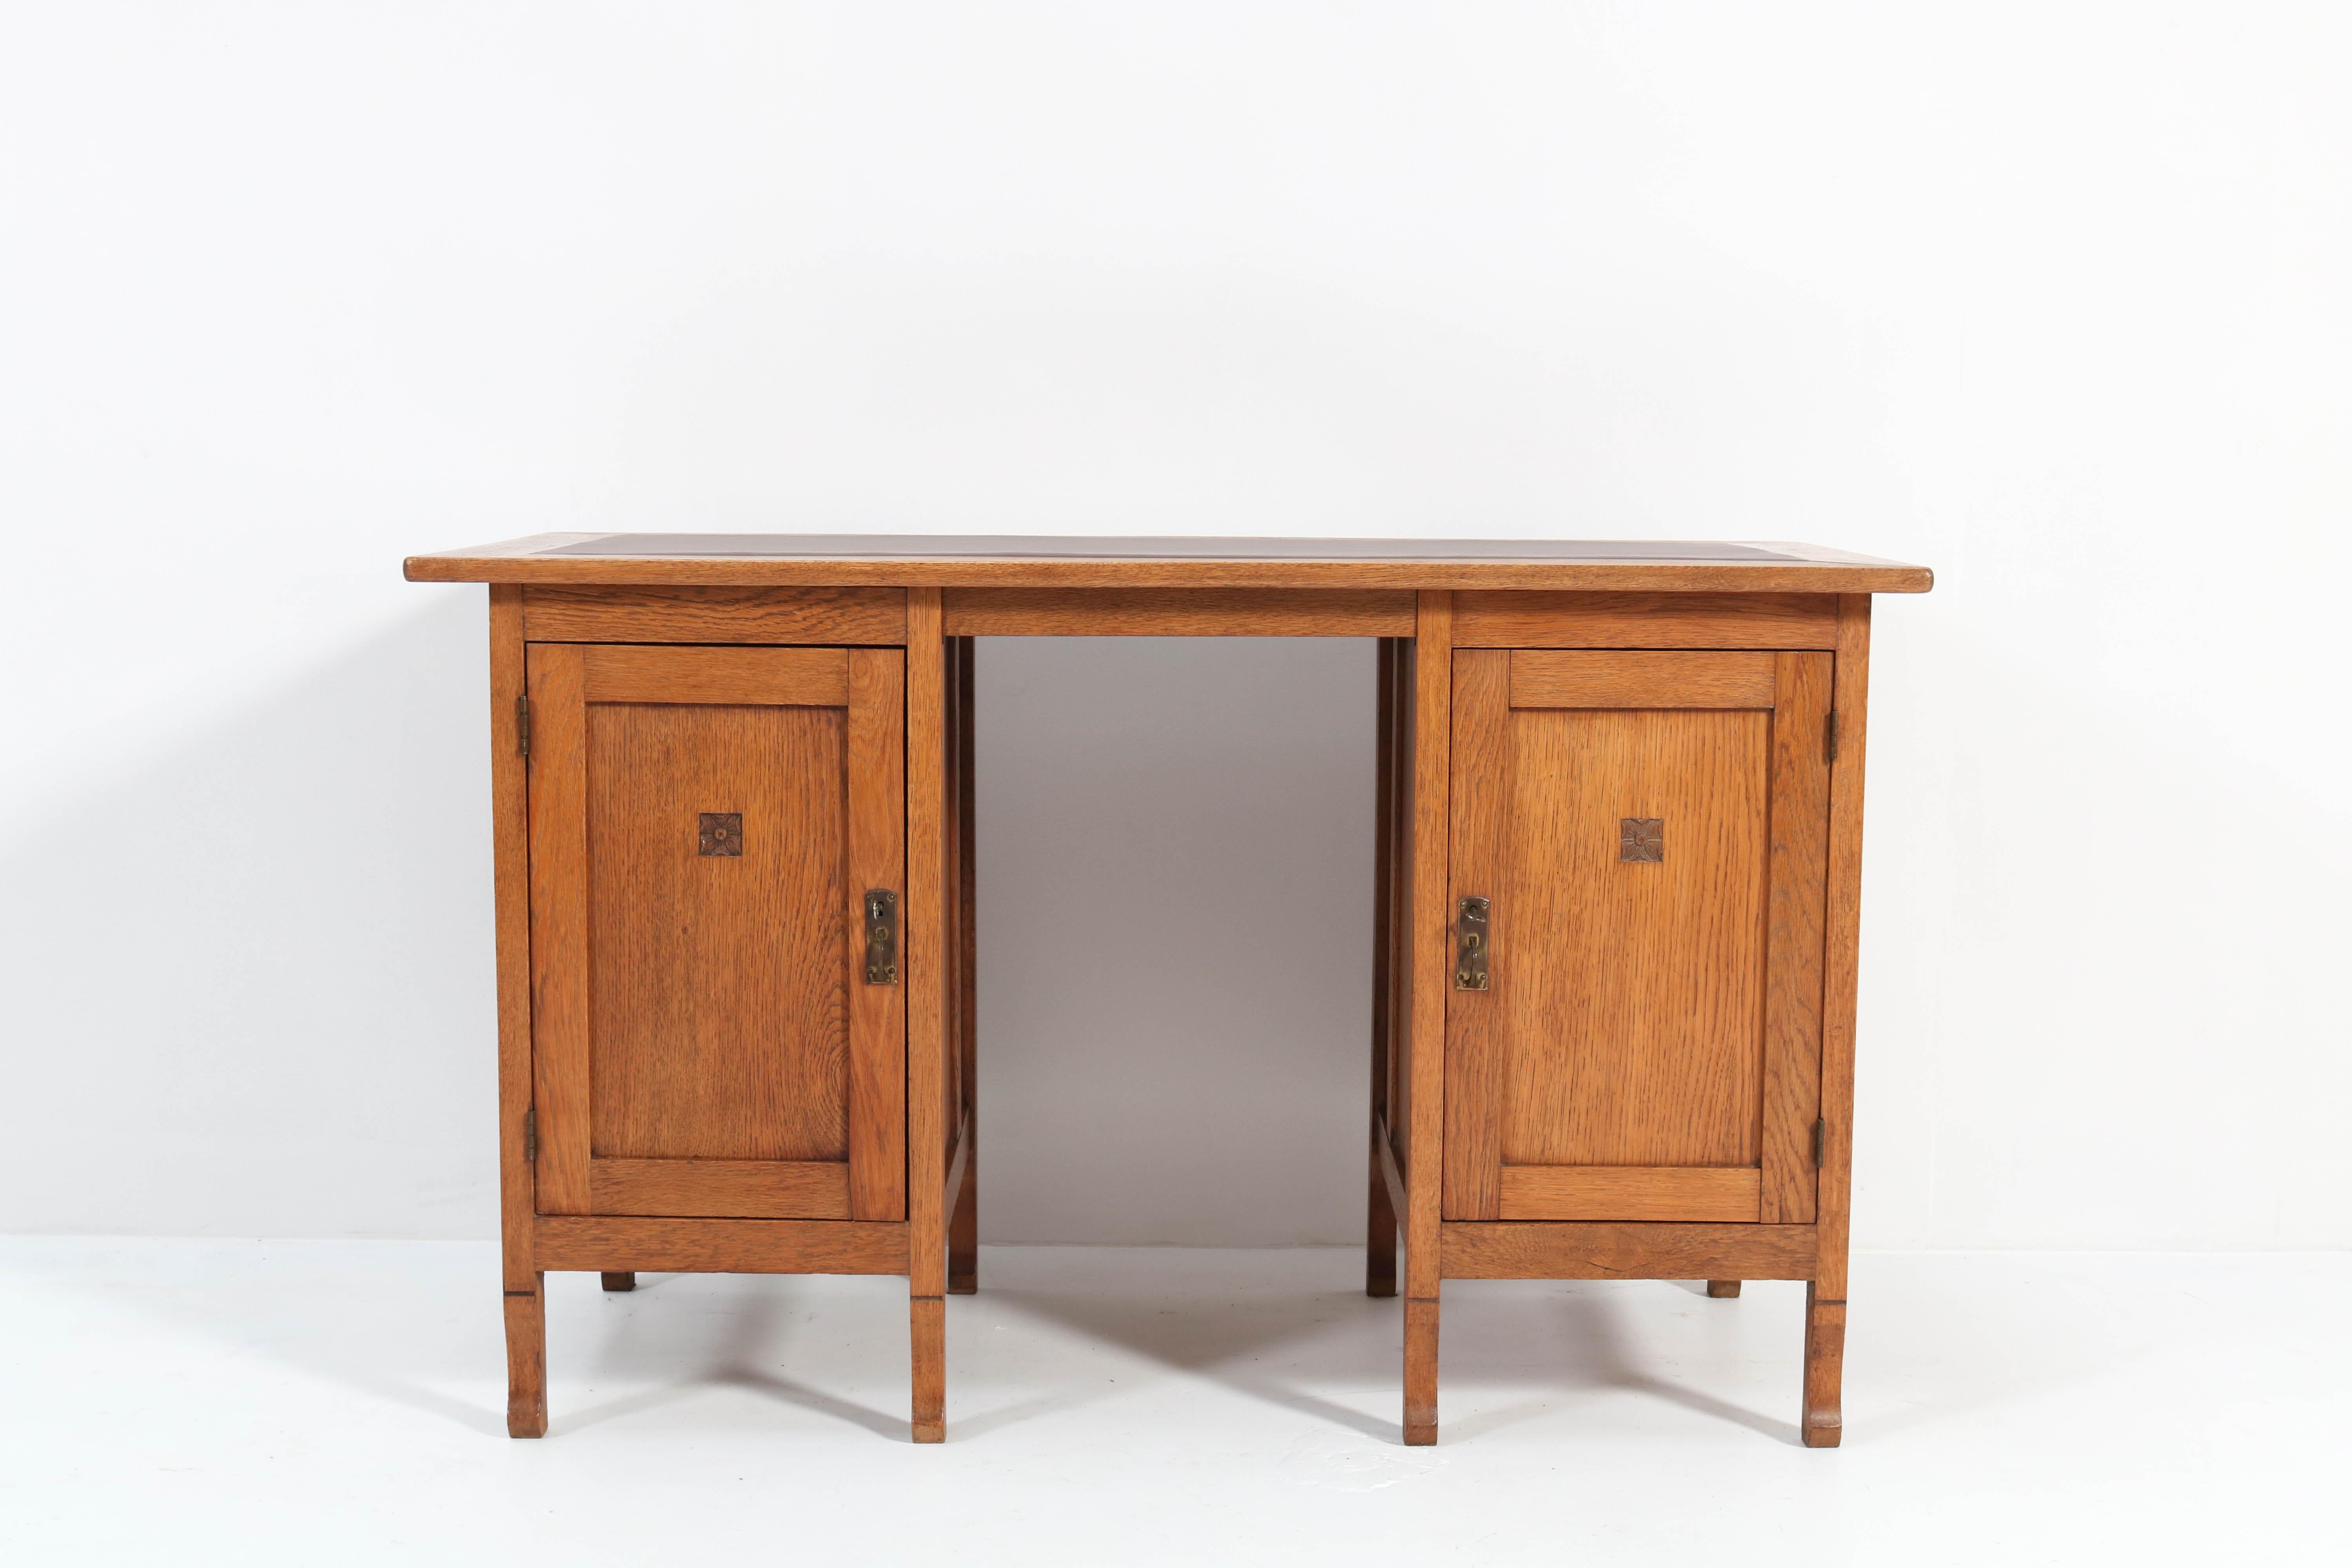 Stunning Art Nouveau Arts & Crafts pedestal desk.
Striking Dutch design from the 1900s.
Solid oak with original brass handles.
The top has a new faux leather writing section.
This wonderful piece of furniture can be dismantled into three pieces